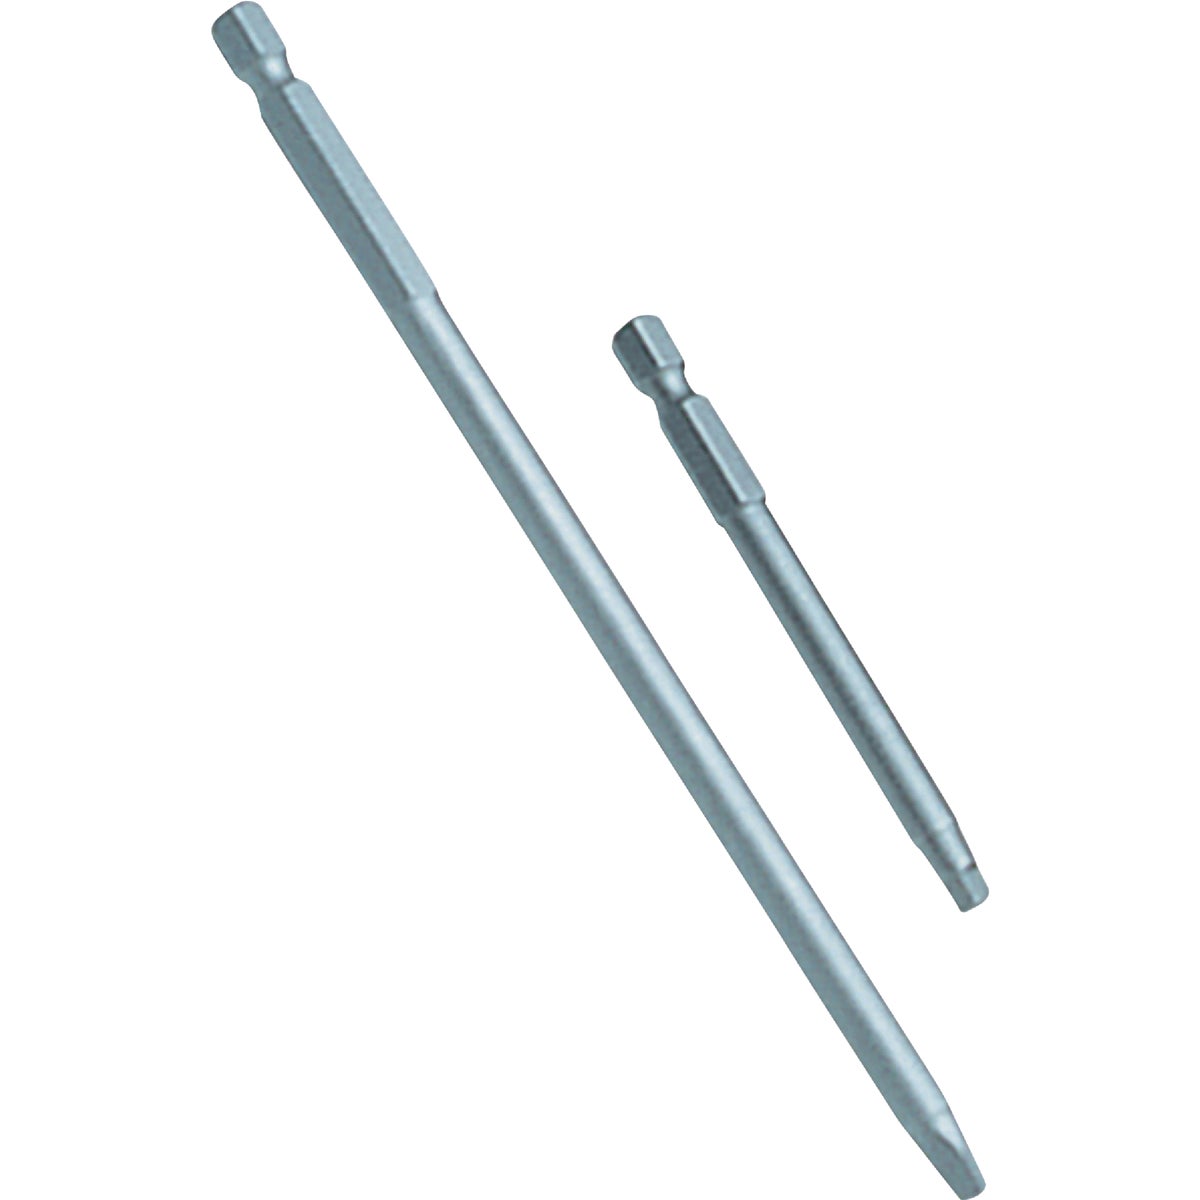 Item 320637, All Kreg drivers feature a solid one-piece construction, magnetic tip, and 